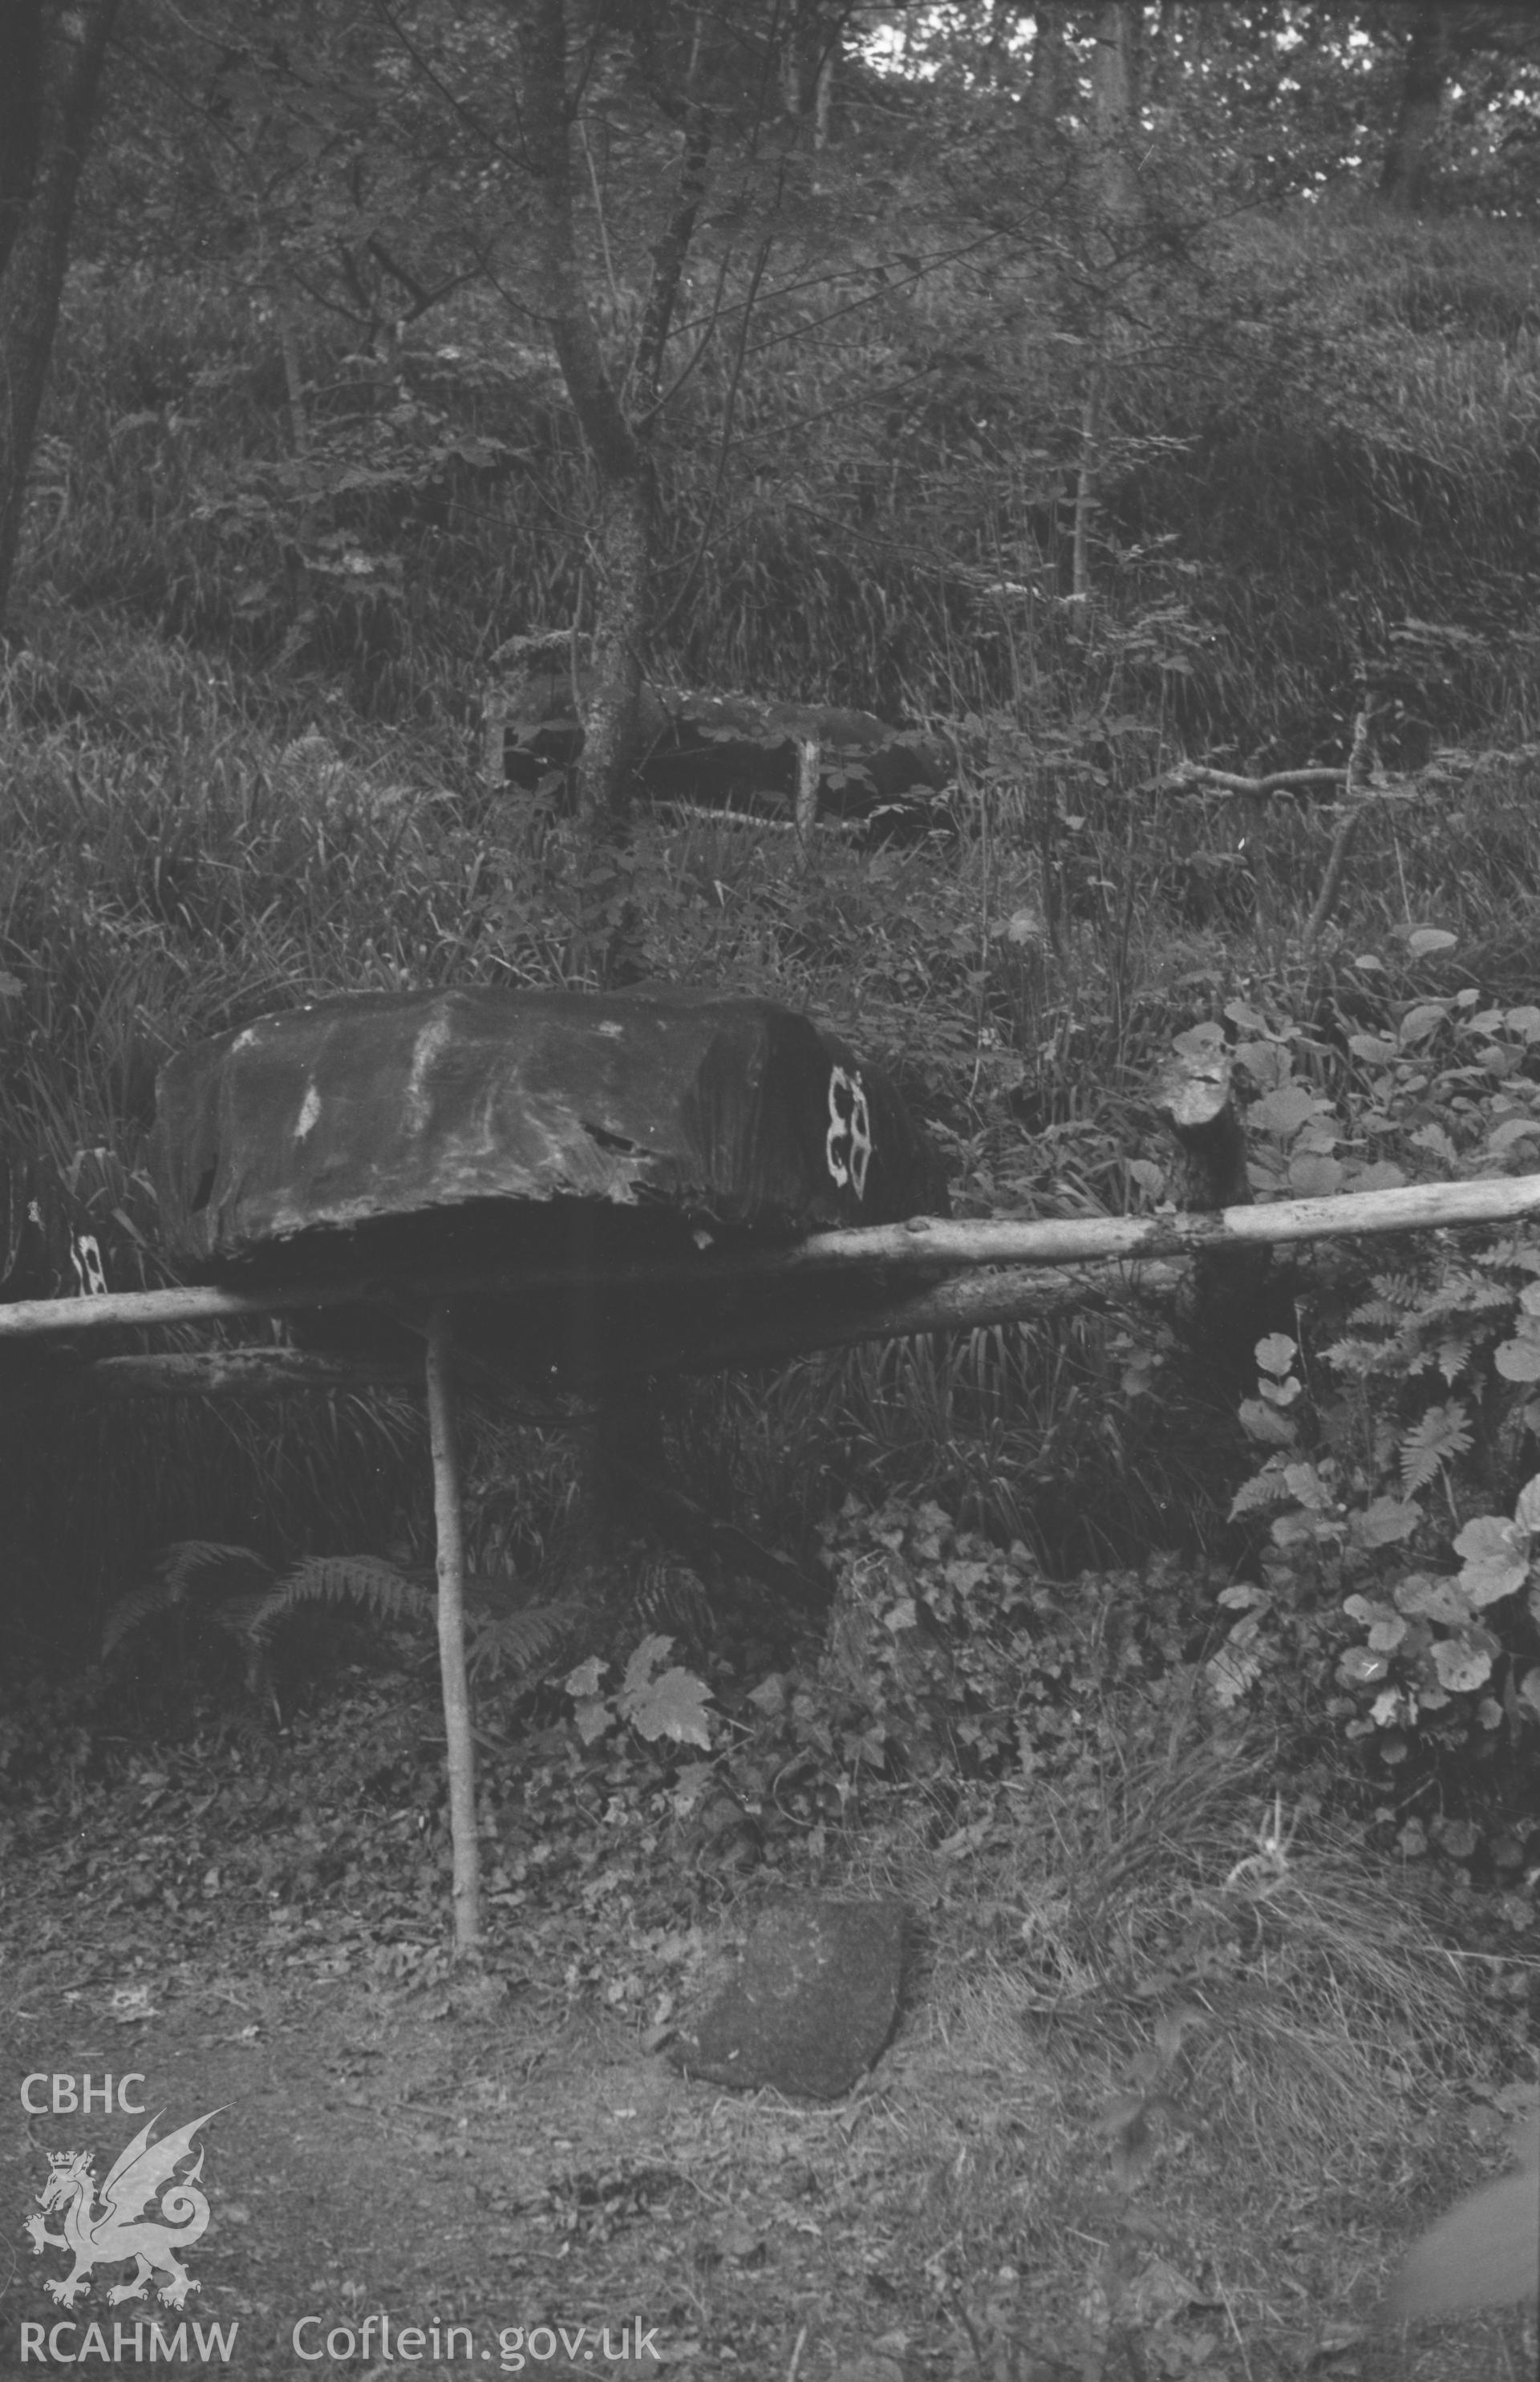 Digital copy of a black and white negative showing coracles on the east bank of the Teifi at Cwm Du, 1.5km north of Cilgerran. Photographed by Arthur O. Chater in September 1964 from Grid Reference SN 1943 4447.